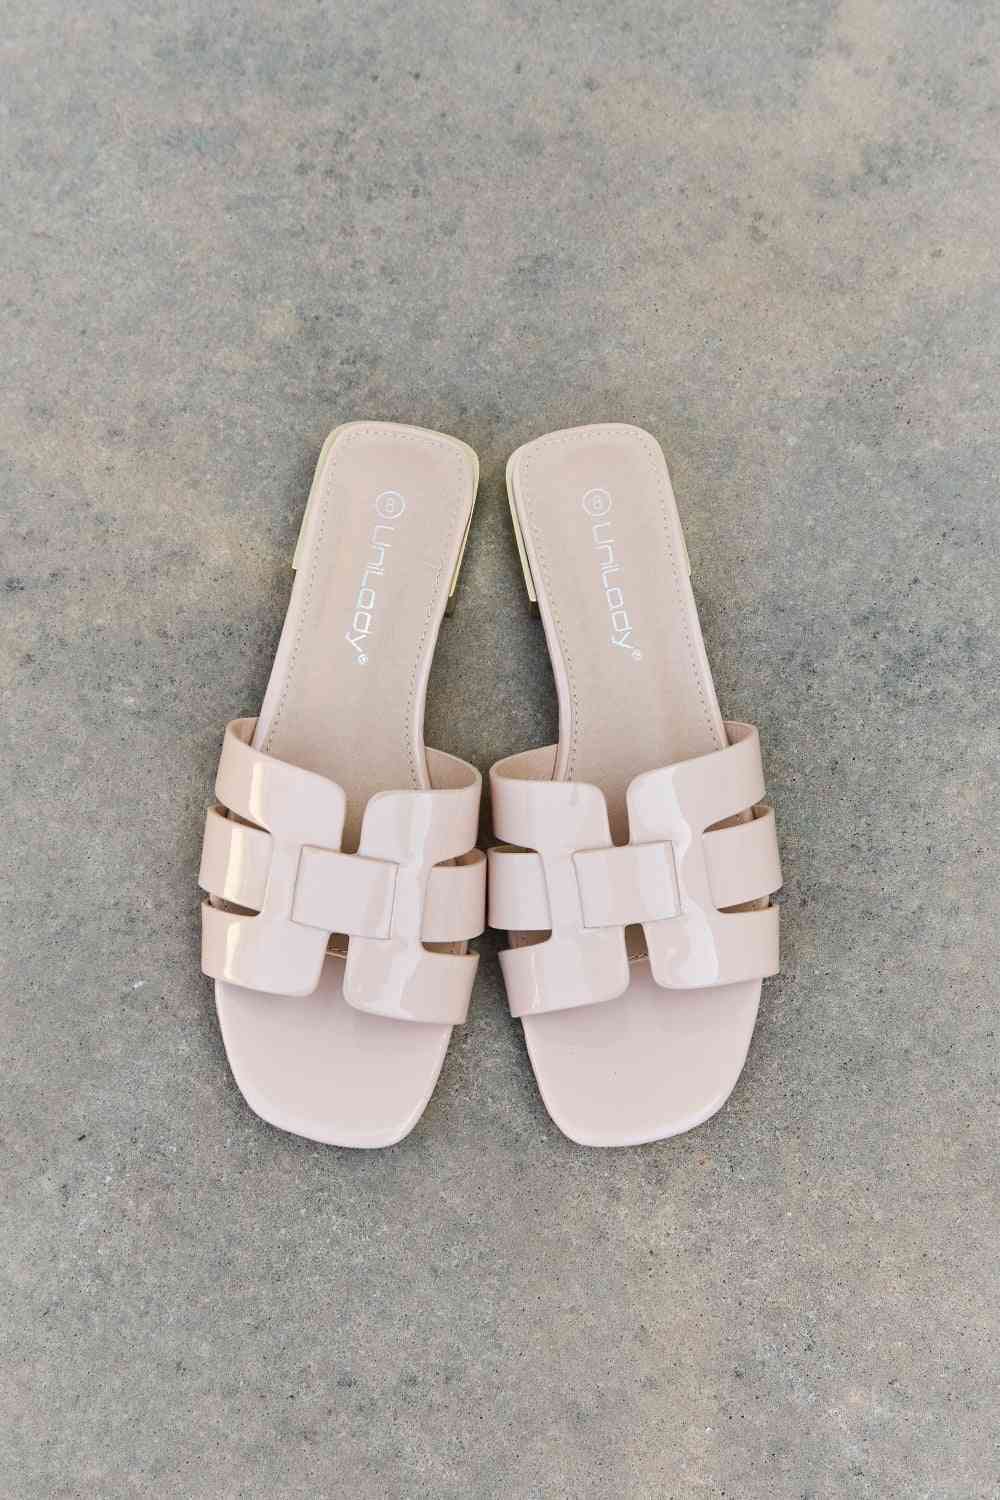 Walk It Out Slide Sandals in Nude - Accessories - Shoes - 5 - 2024